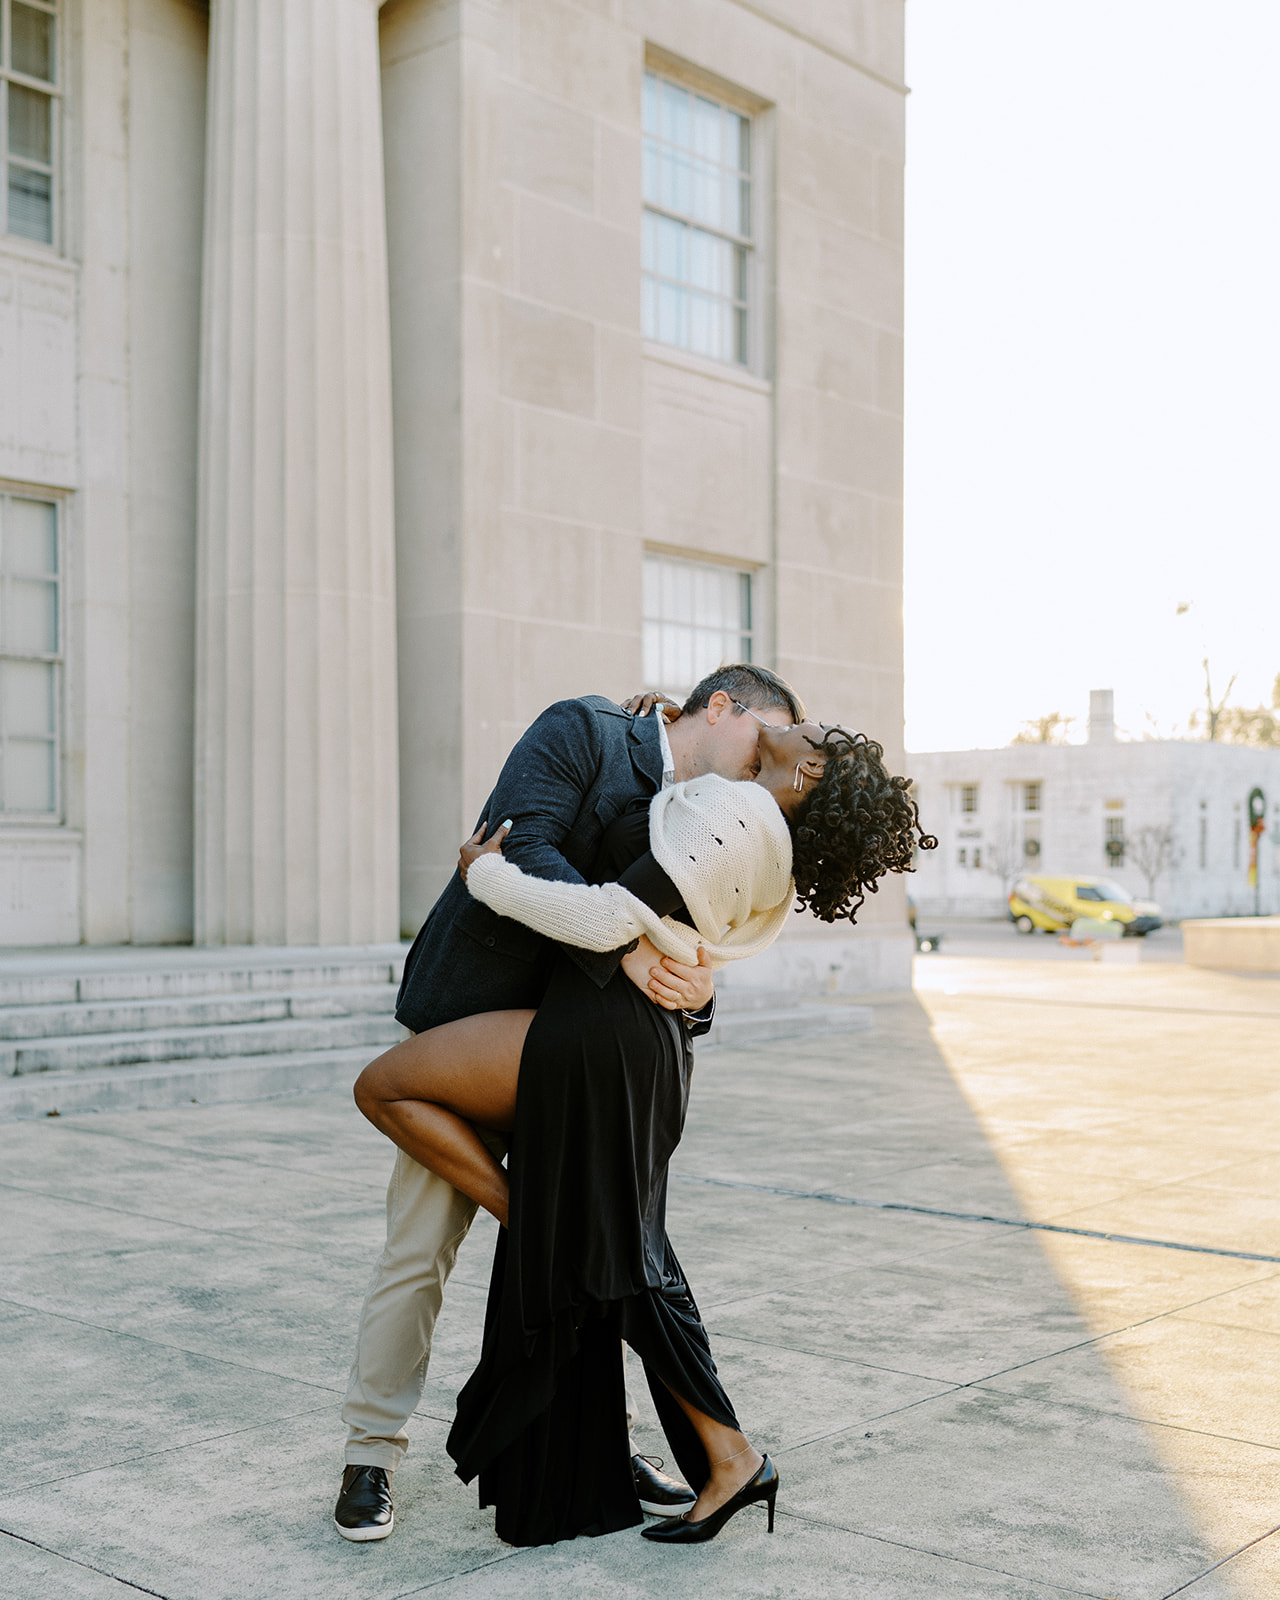 Couples Dancing photography